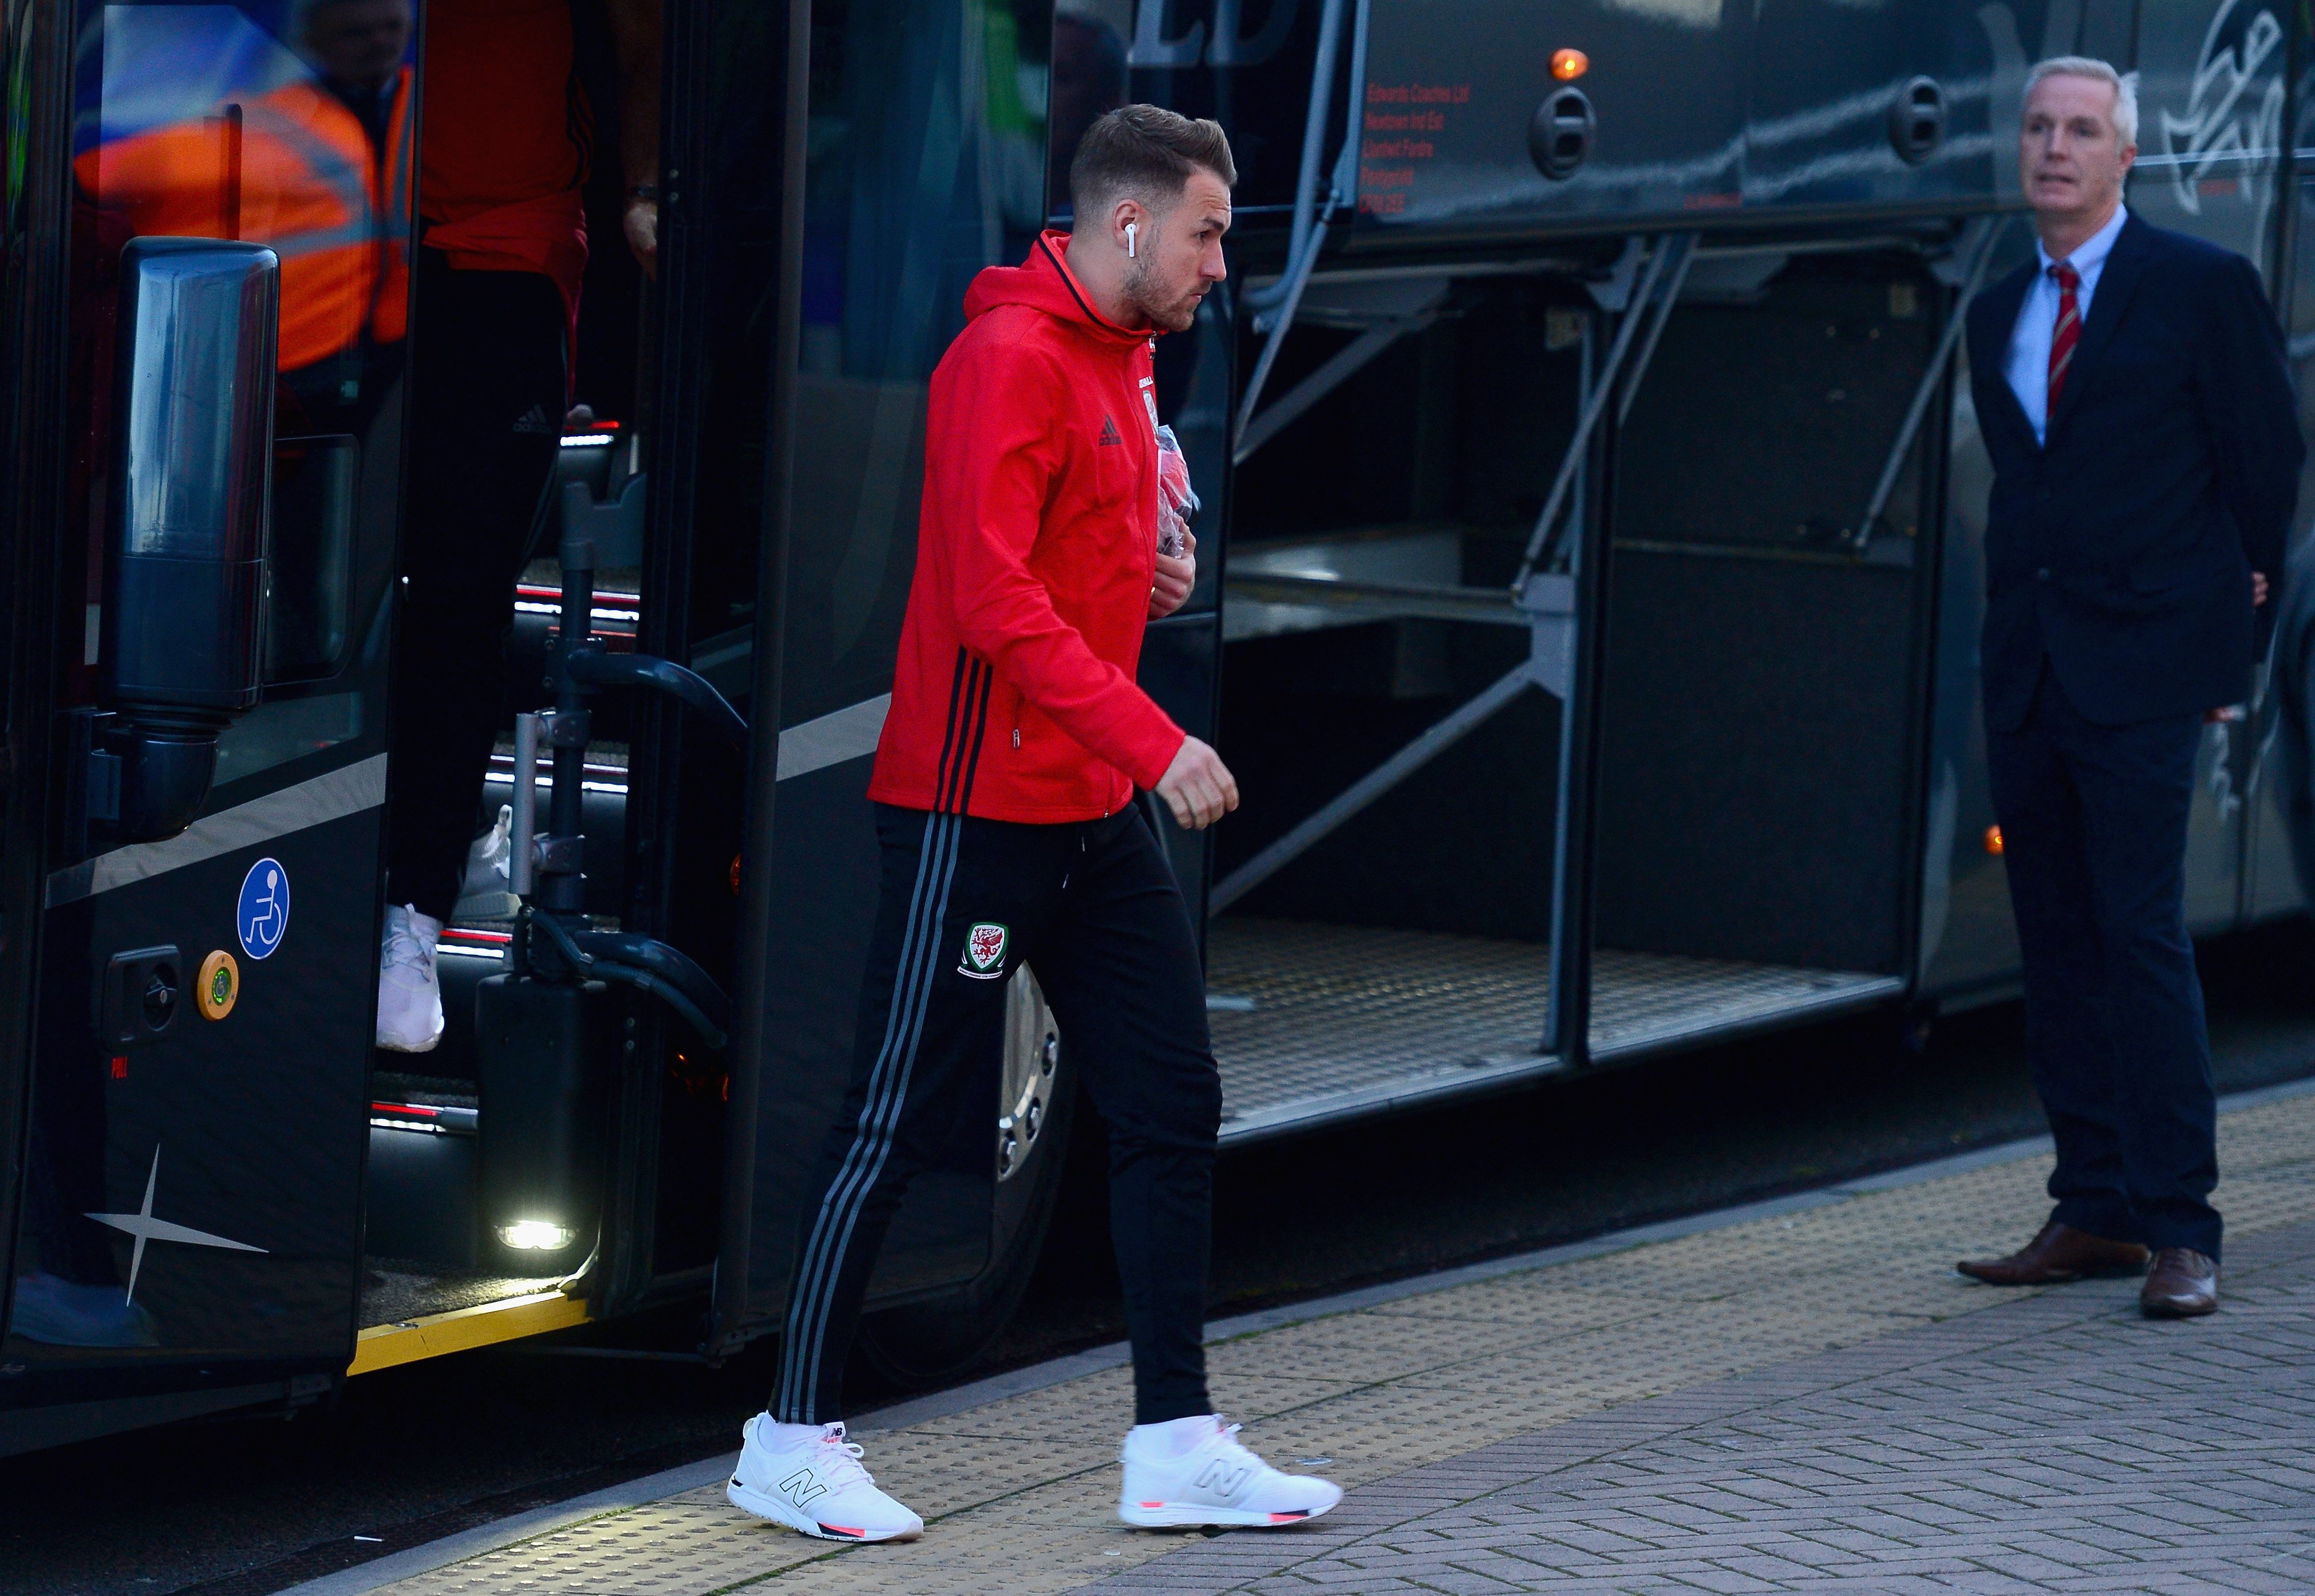 CARDIFF, UNITED KINGDOM - OCTOBER 09:  Aaron Ramsey of Wales arrives prior to the FIFA 2018 World Cup Group D  Qualifier between Wales and Republic of Ireland at the Cardiff City Stadium on October 9, 2017 in Cardiff, Wales.  (Photo by Harry Trump/Getty Images)